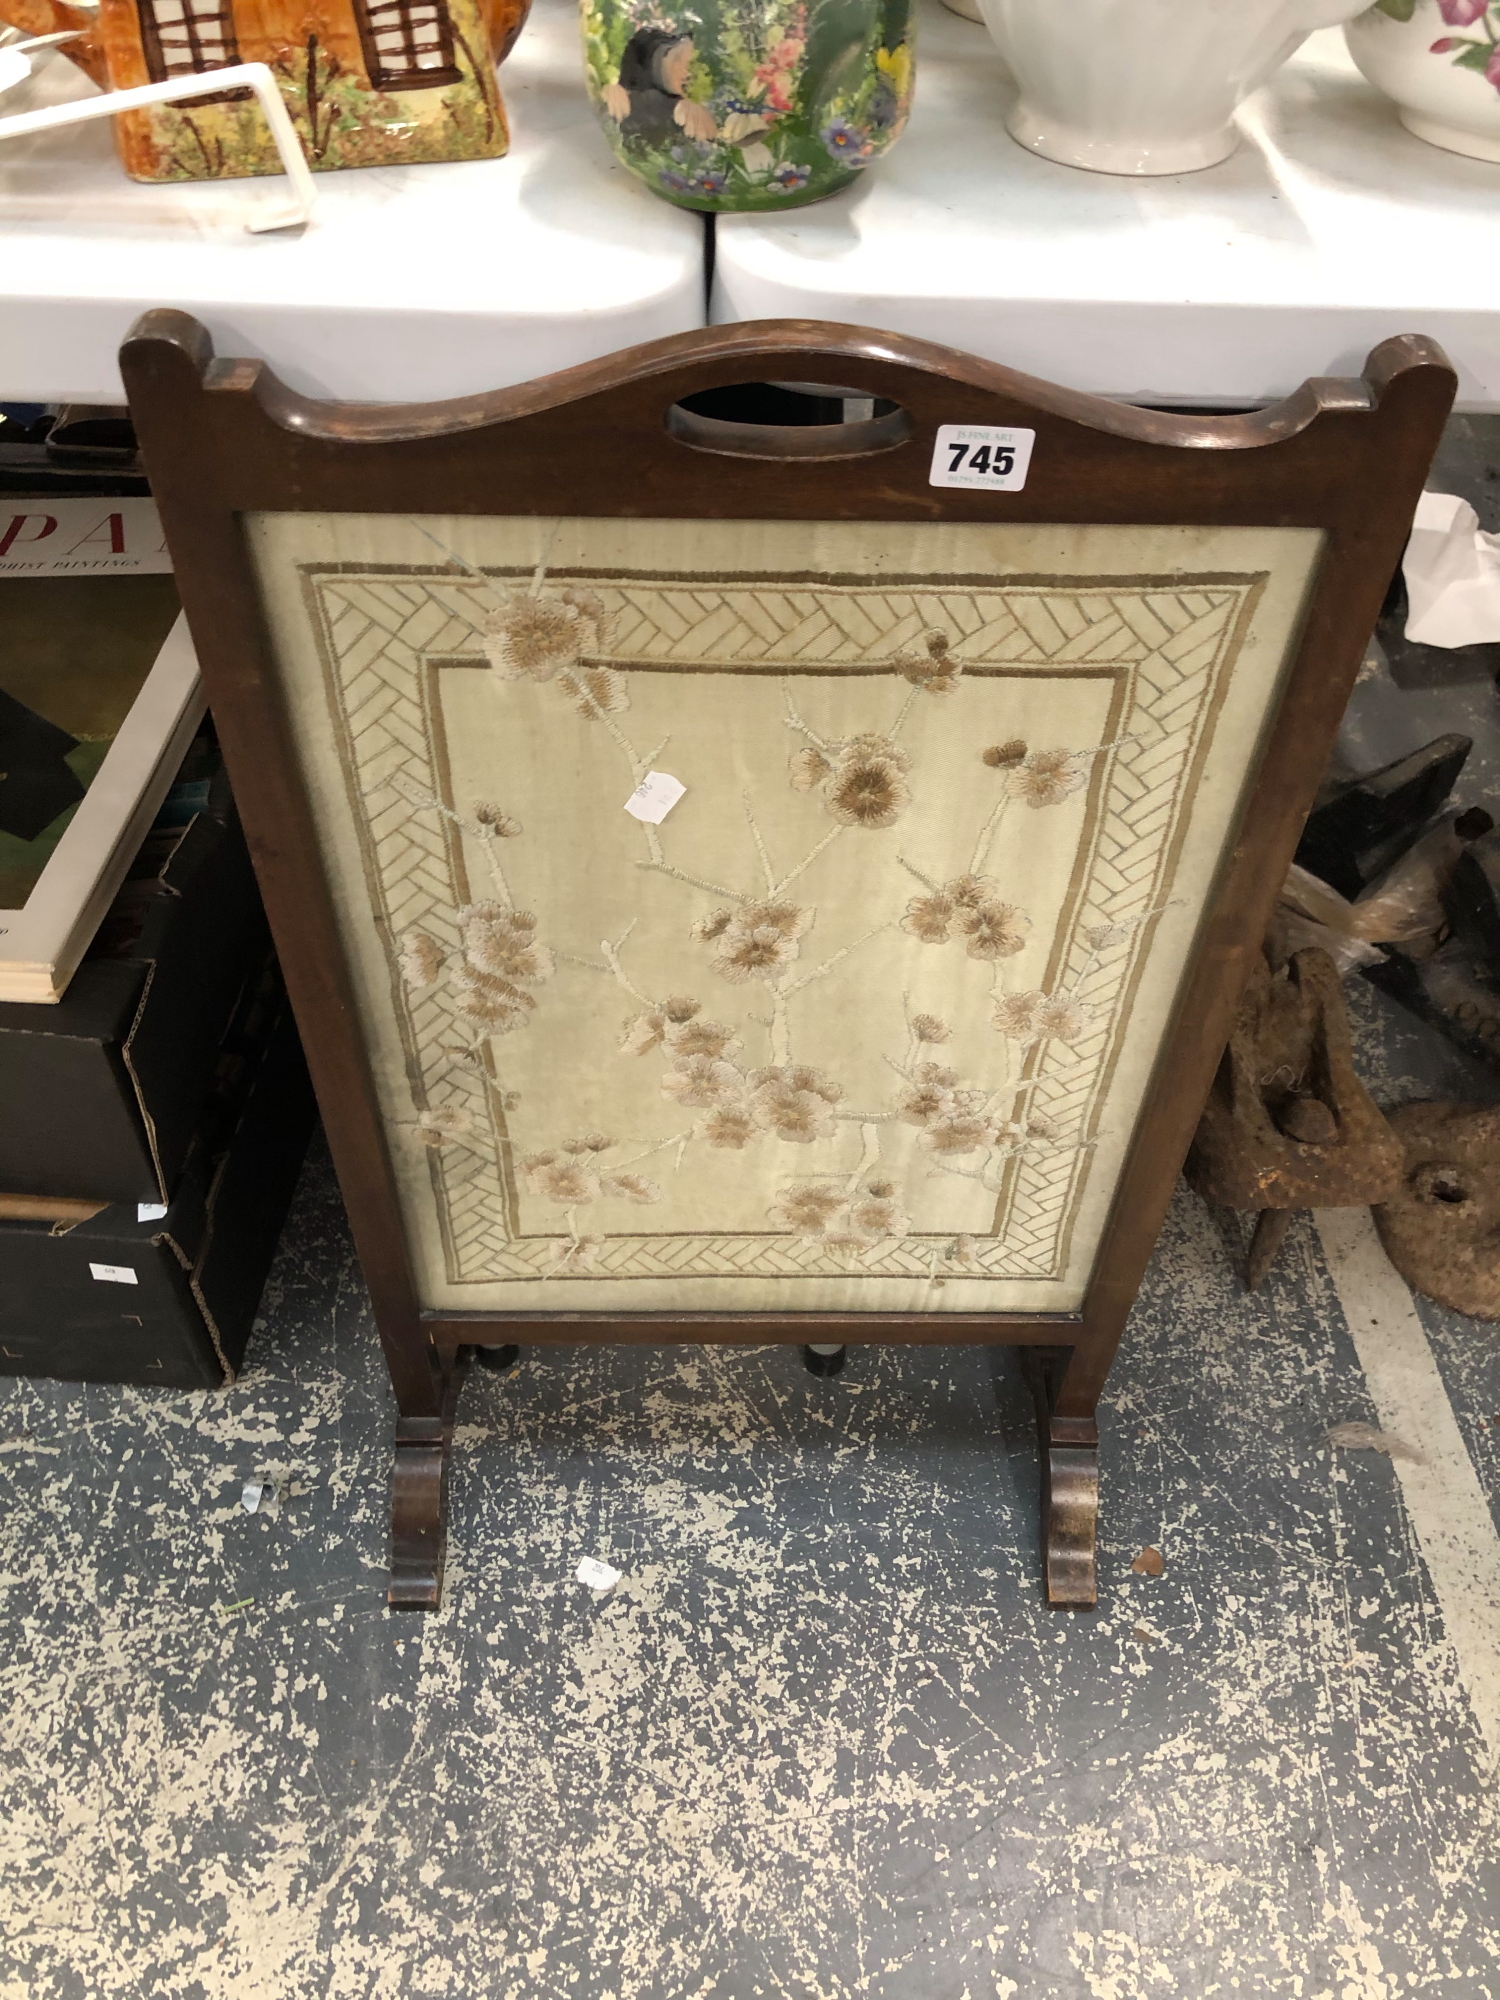 A MAHOGANY FRAMED FIRESCREEN WITH CHERRY BLOSSOM EMBROIDERED IN SILKS